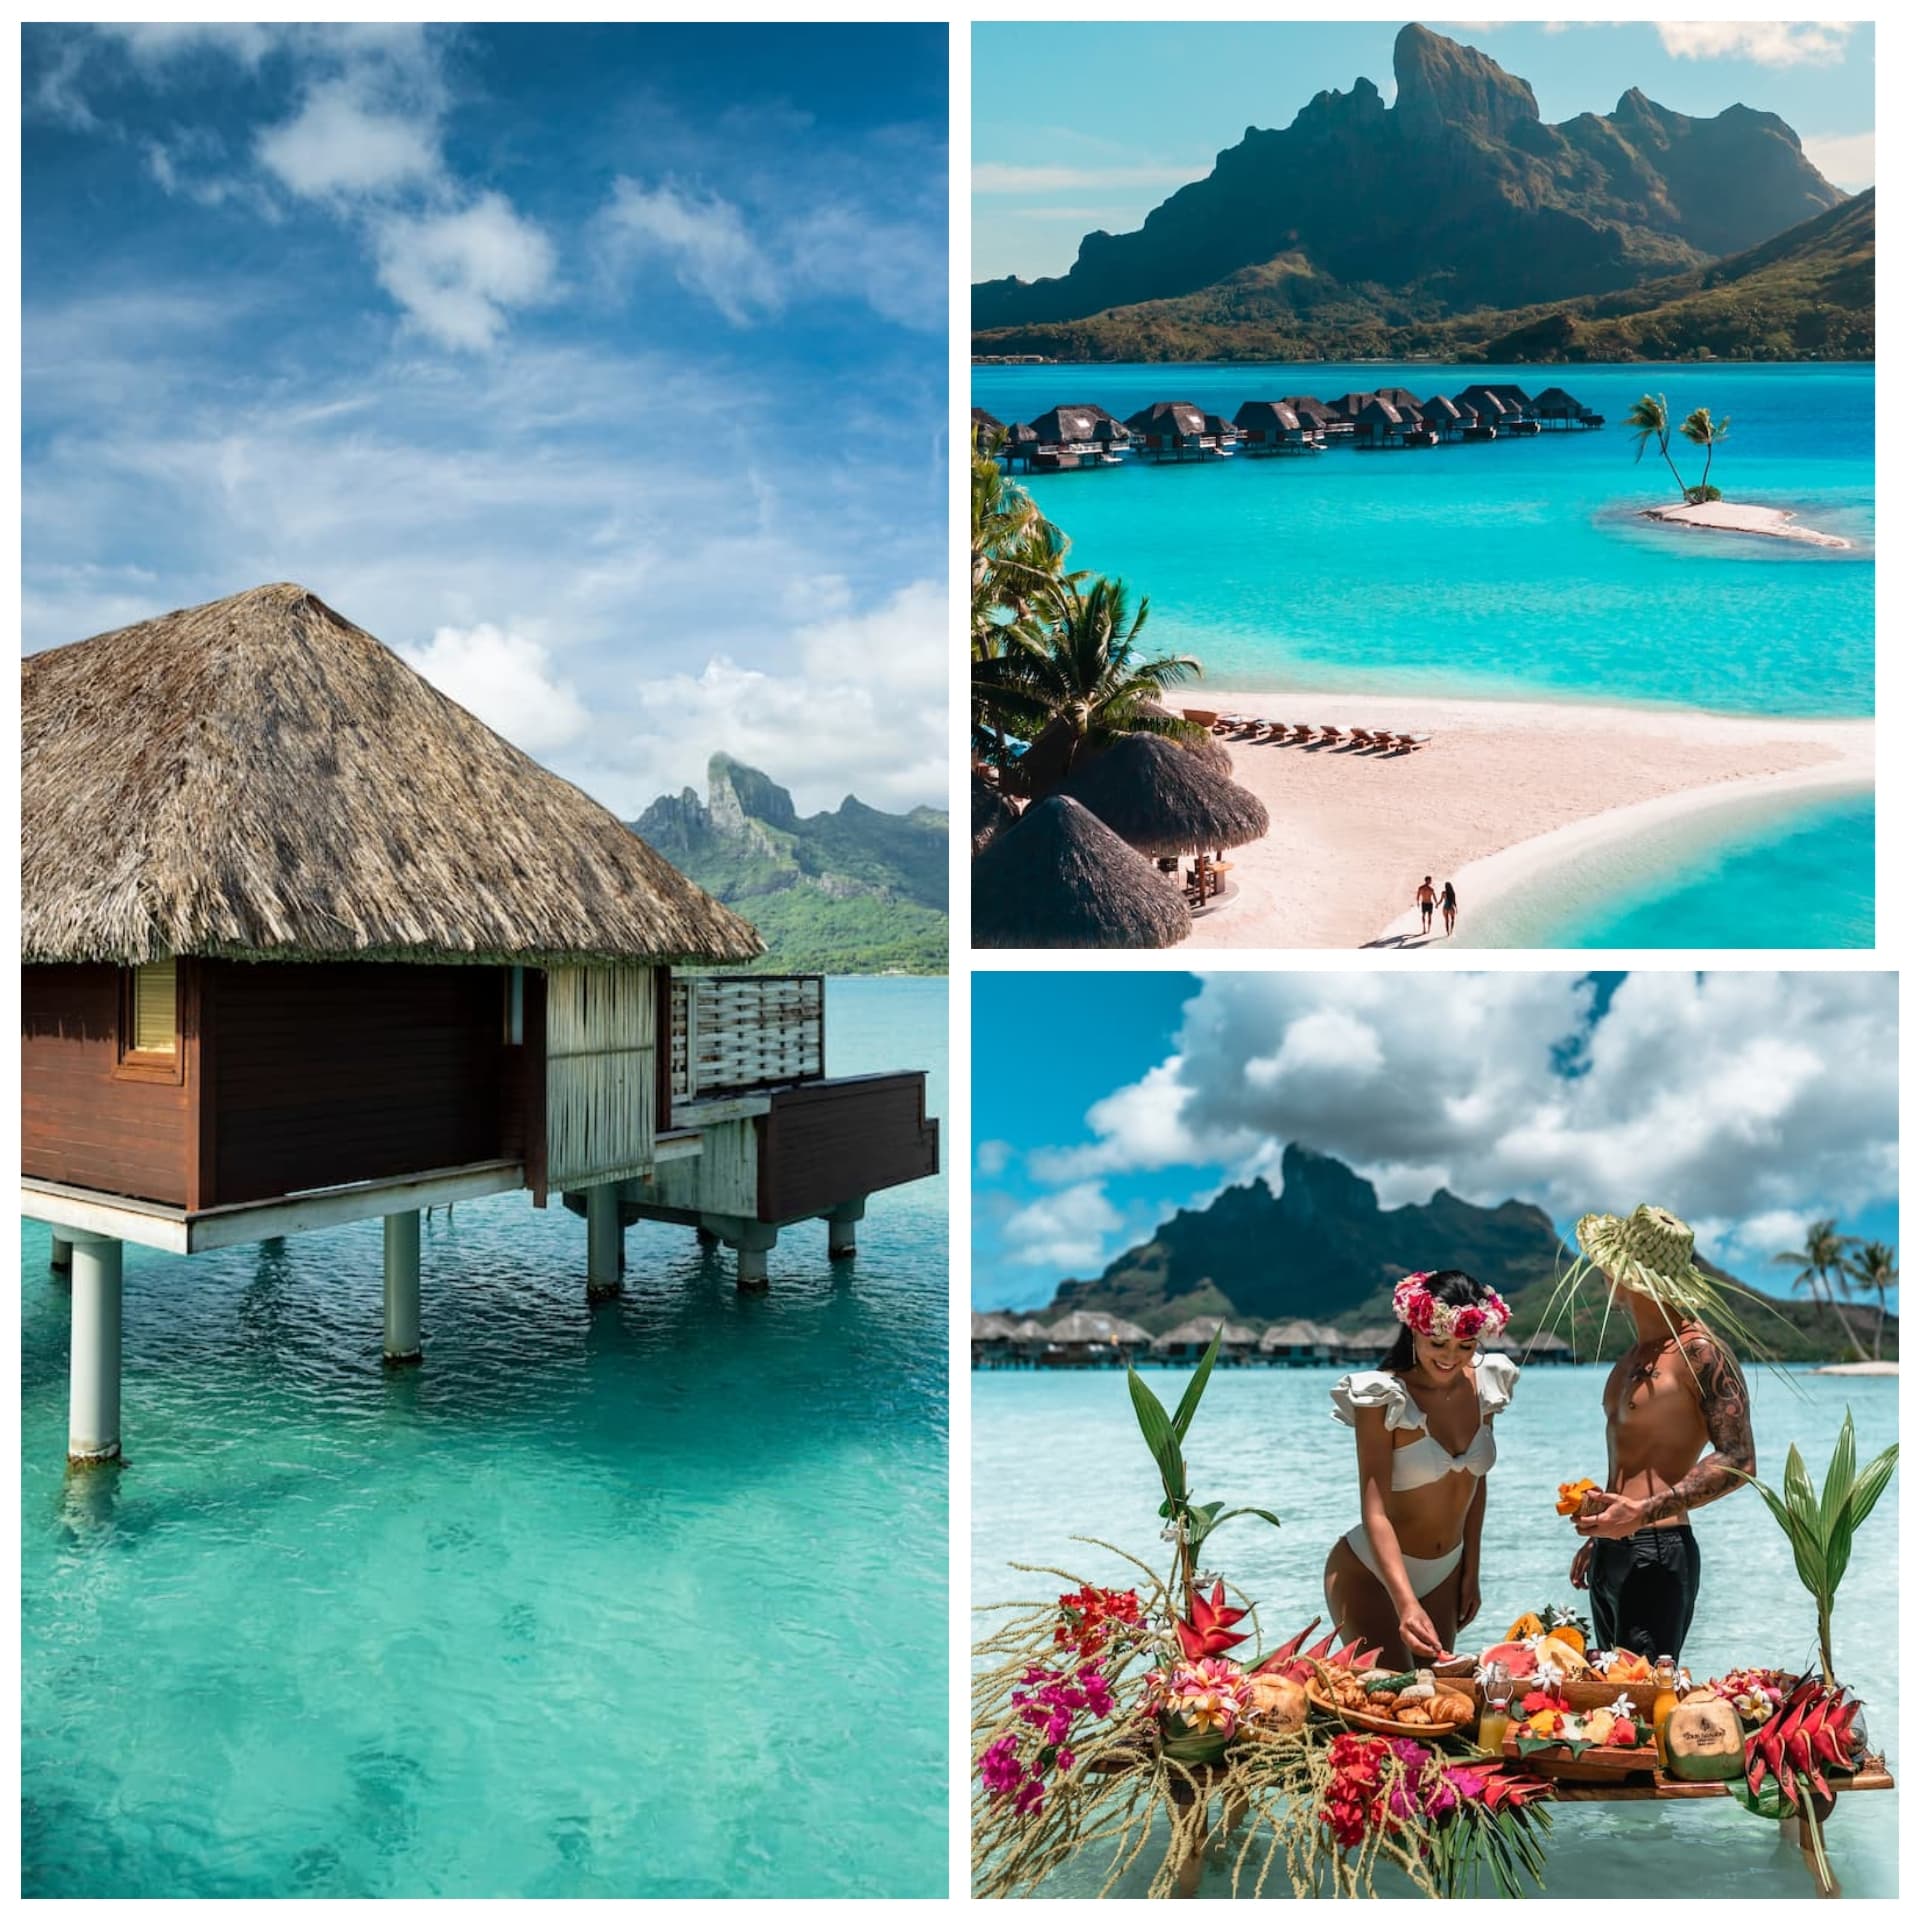 Collage of Four Seasons Resort Bora Bora with overwater bungalow and Mt. Otemanu, couple strolling along white sand beach, and couple with breakfast in a canoe.